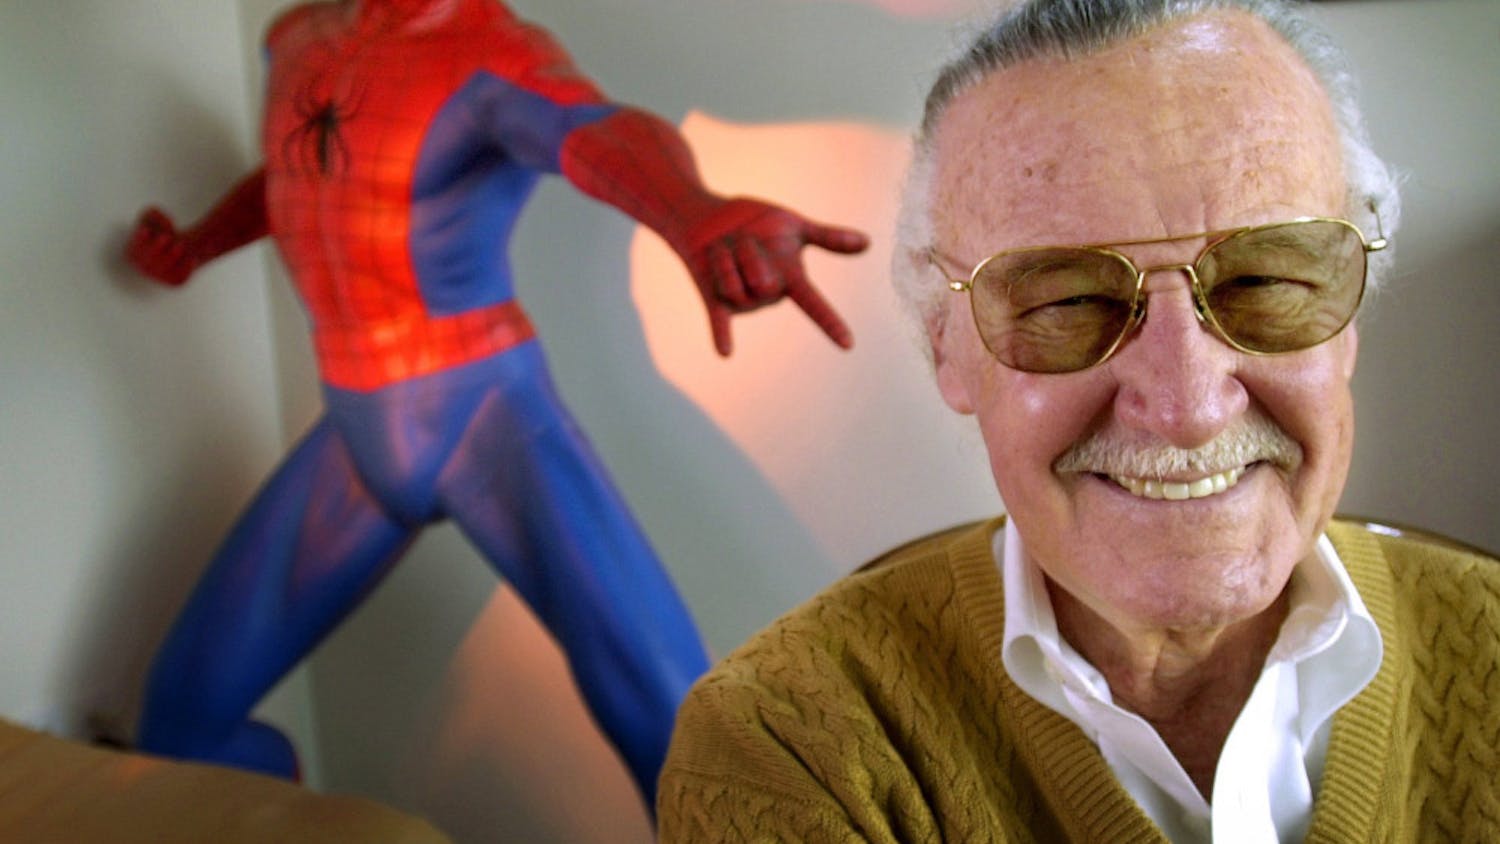 UF students remember the comic book legend Stan Lee